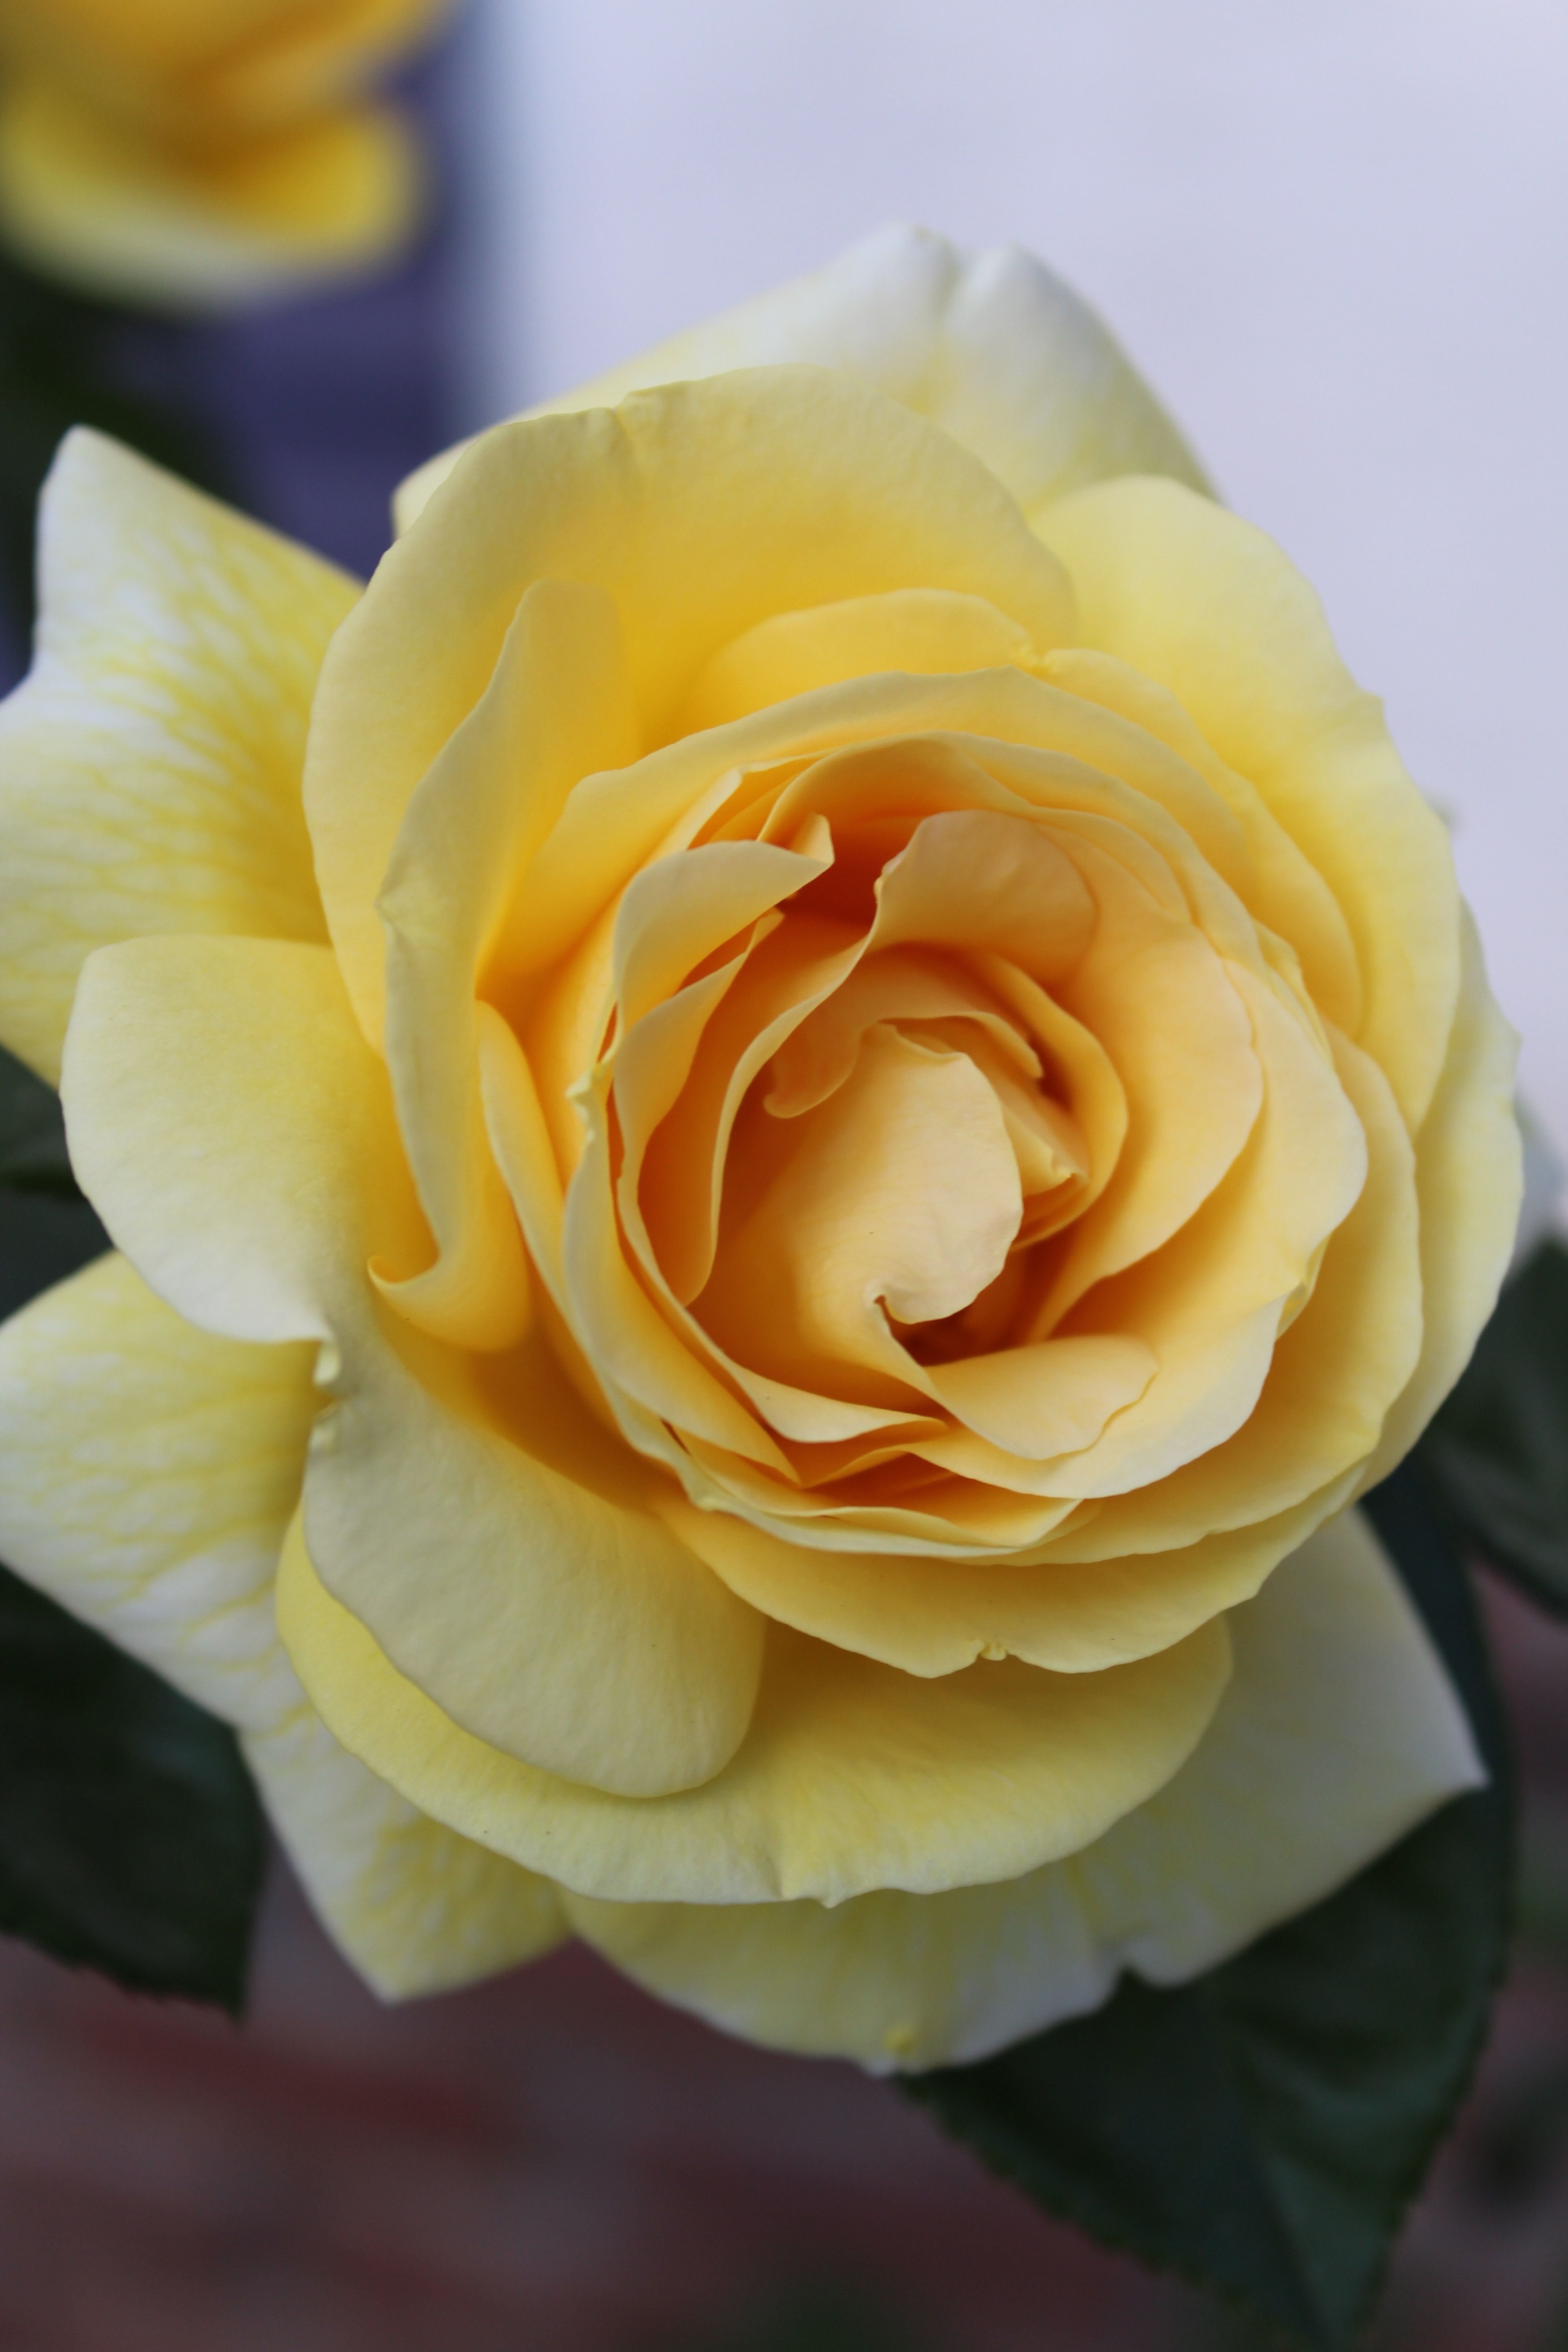 Yellow Rose Flower in Close-up Photography, Anniversary, Flower, Rose, Romantic, HQ Photo